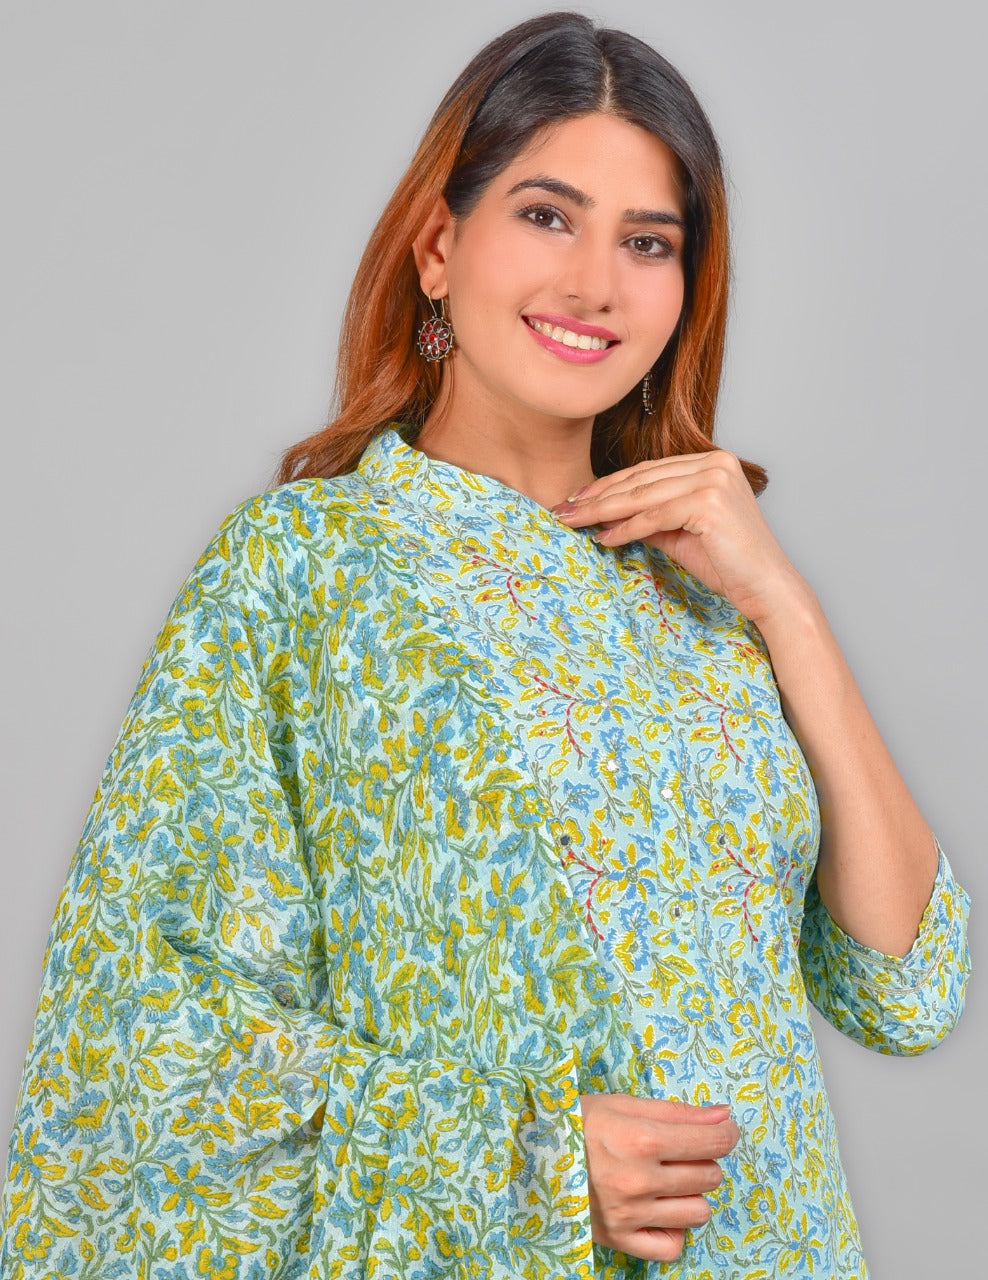 Yash Gallery Women's Embroidered Floral Printed Straight Kurta with Pant and Dupatta (Green)